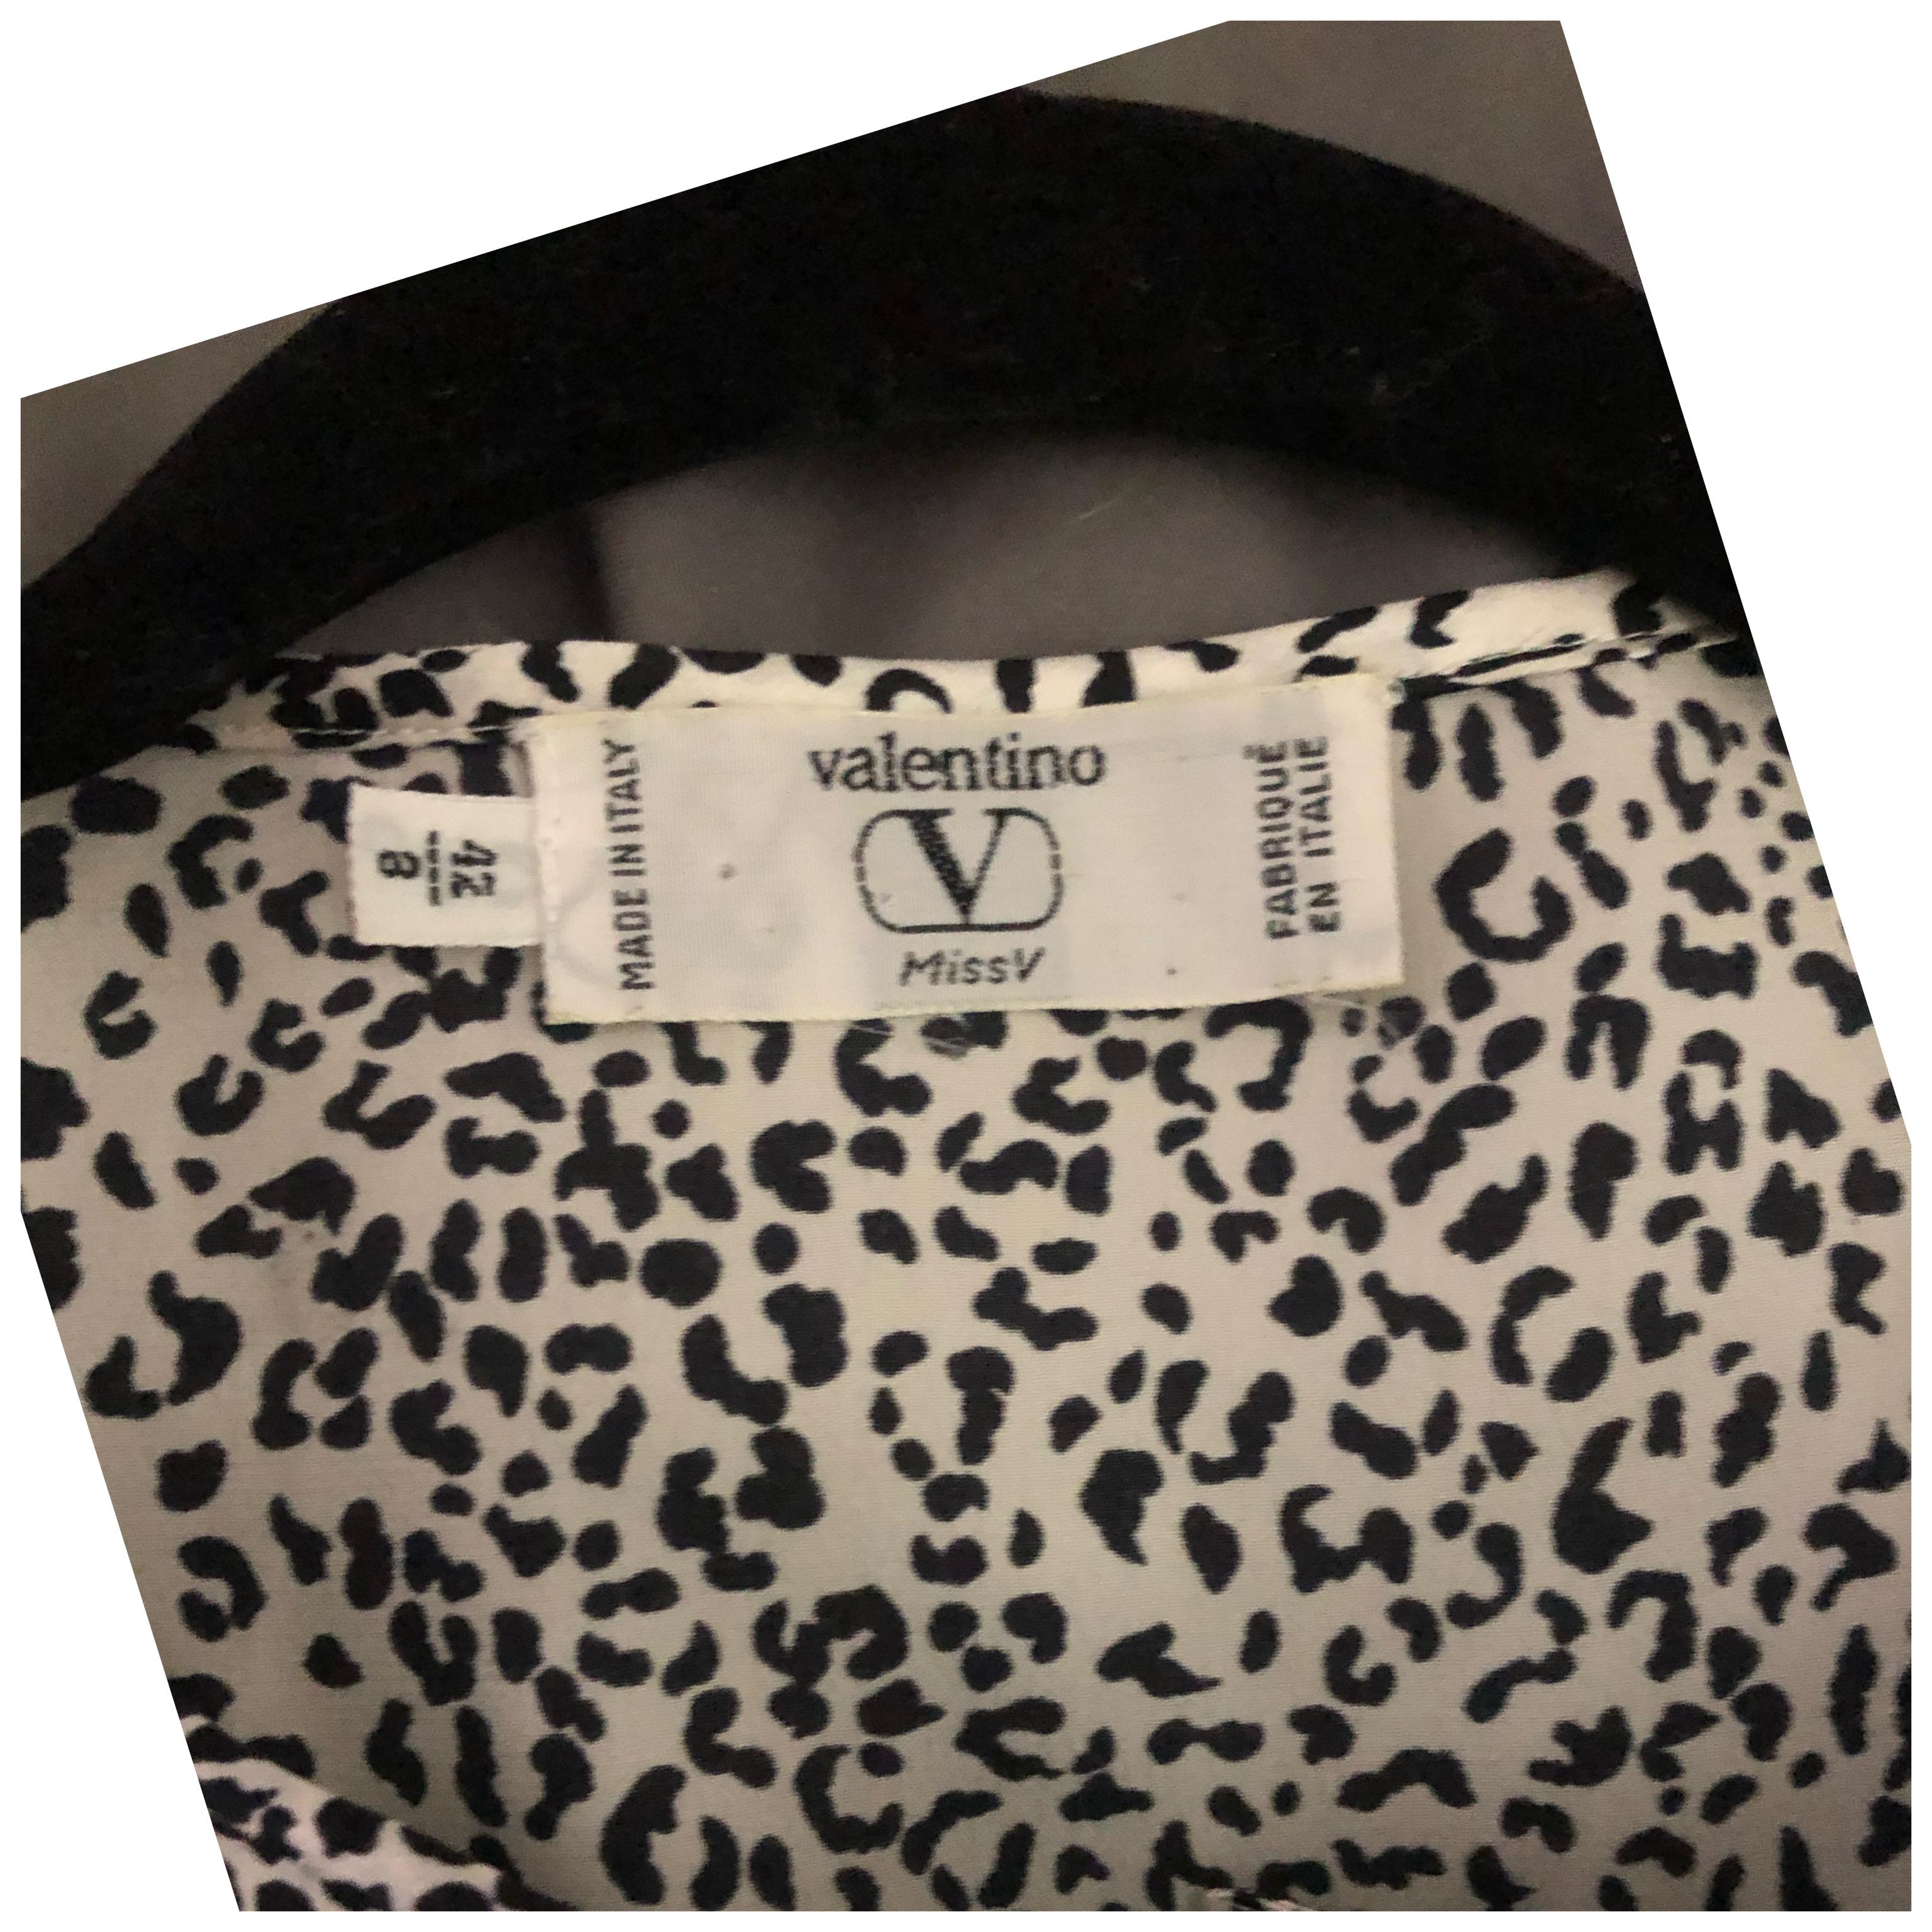 Valentino Italy Miss V Vintage Black & White Animal Silk Print Blouse NWT Size 8 In Excellent Condition For Sale In Palm Springs, CA